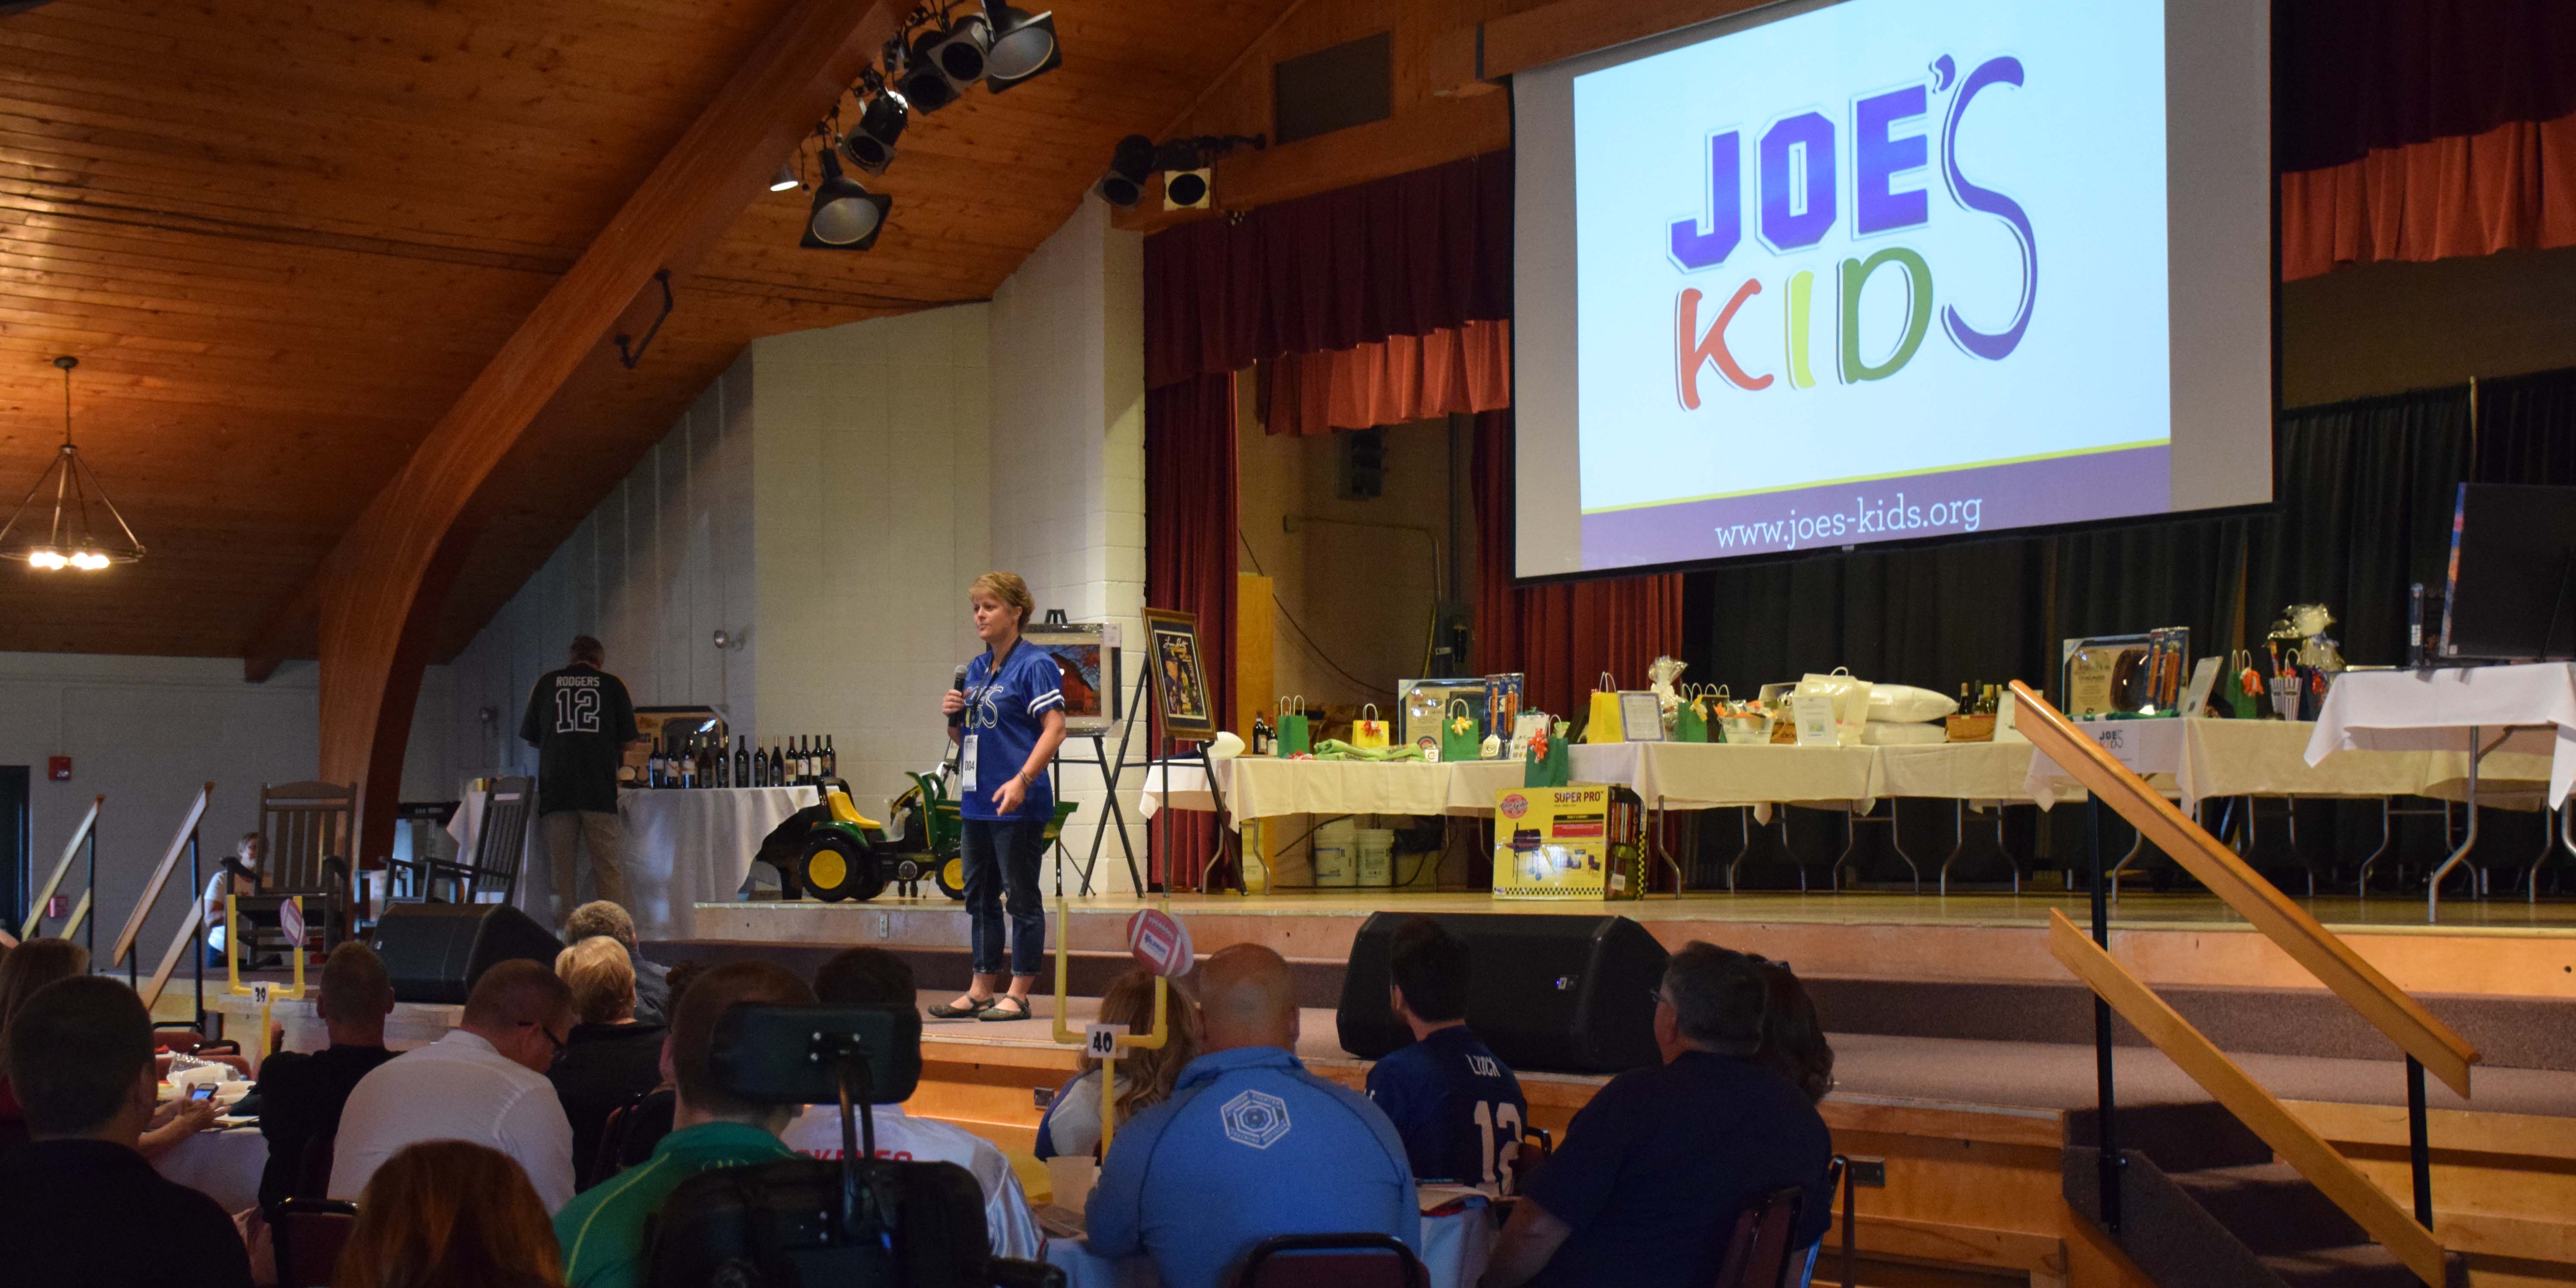 The whole evening was held to raise funds for Joe's Kids, a nonprofit organization providing physical, occupational and speech therapy for children with developmental delays.  